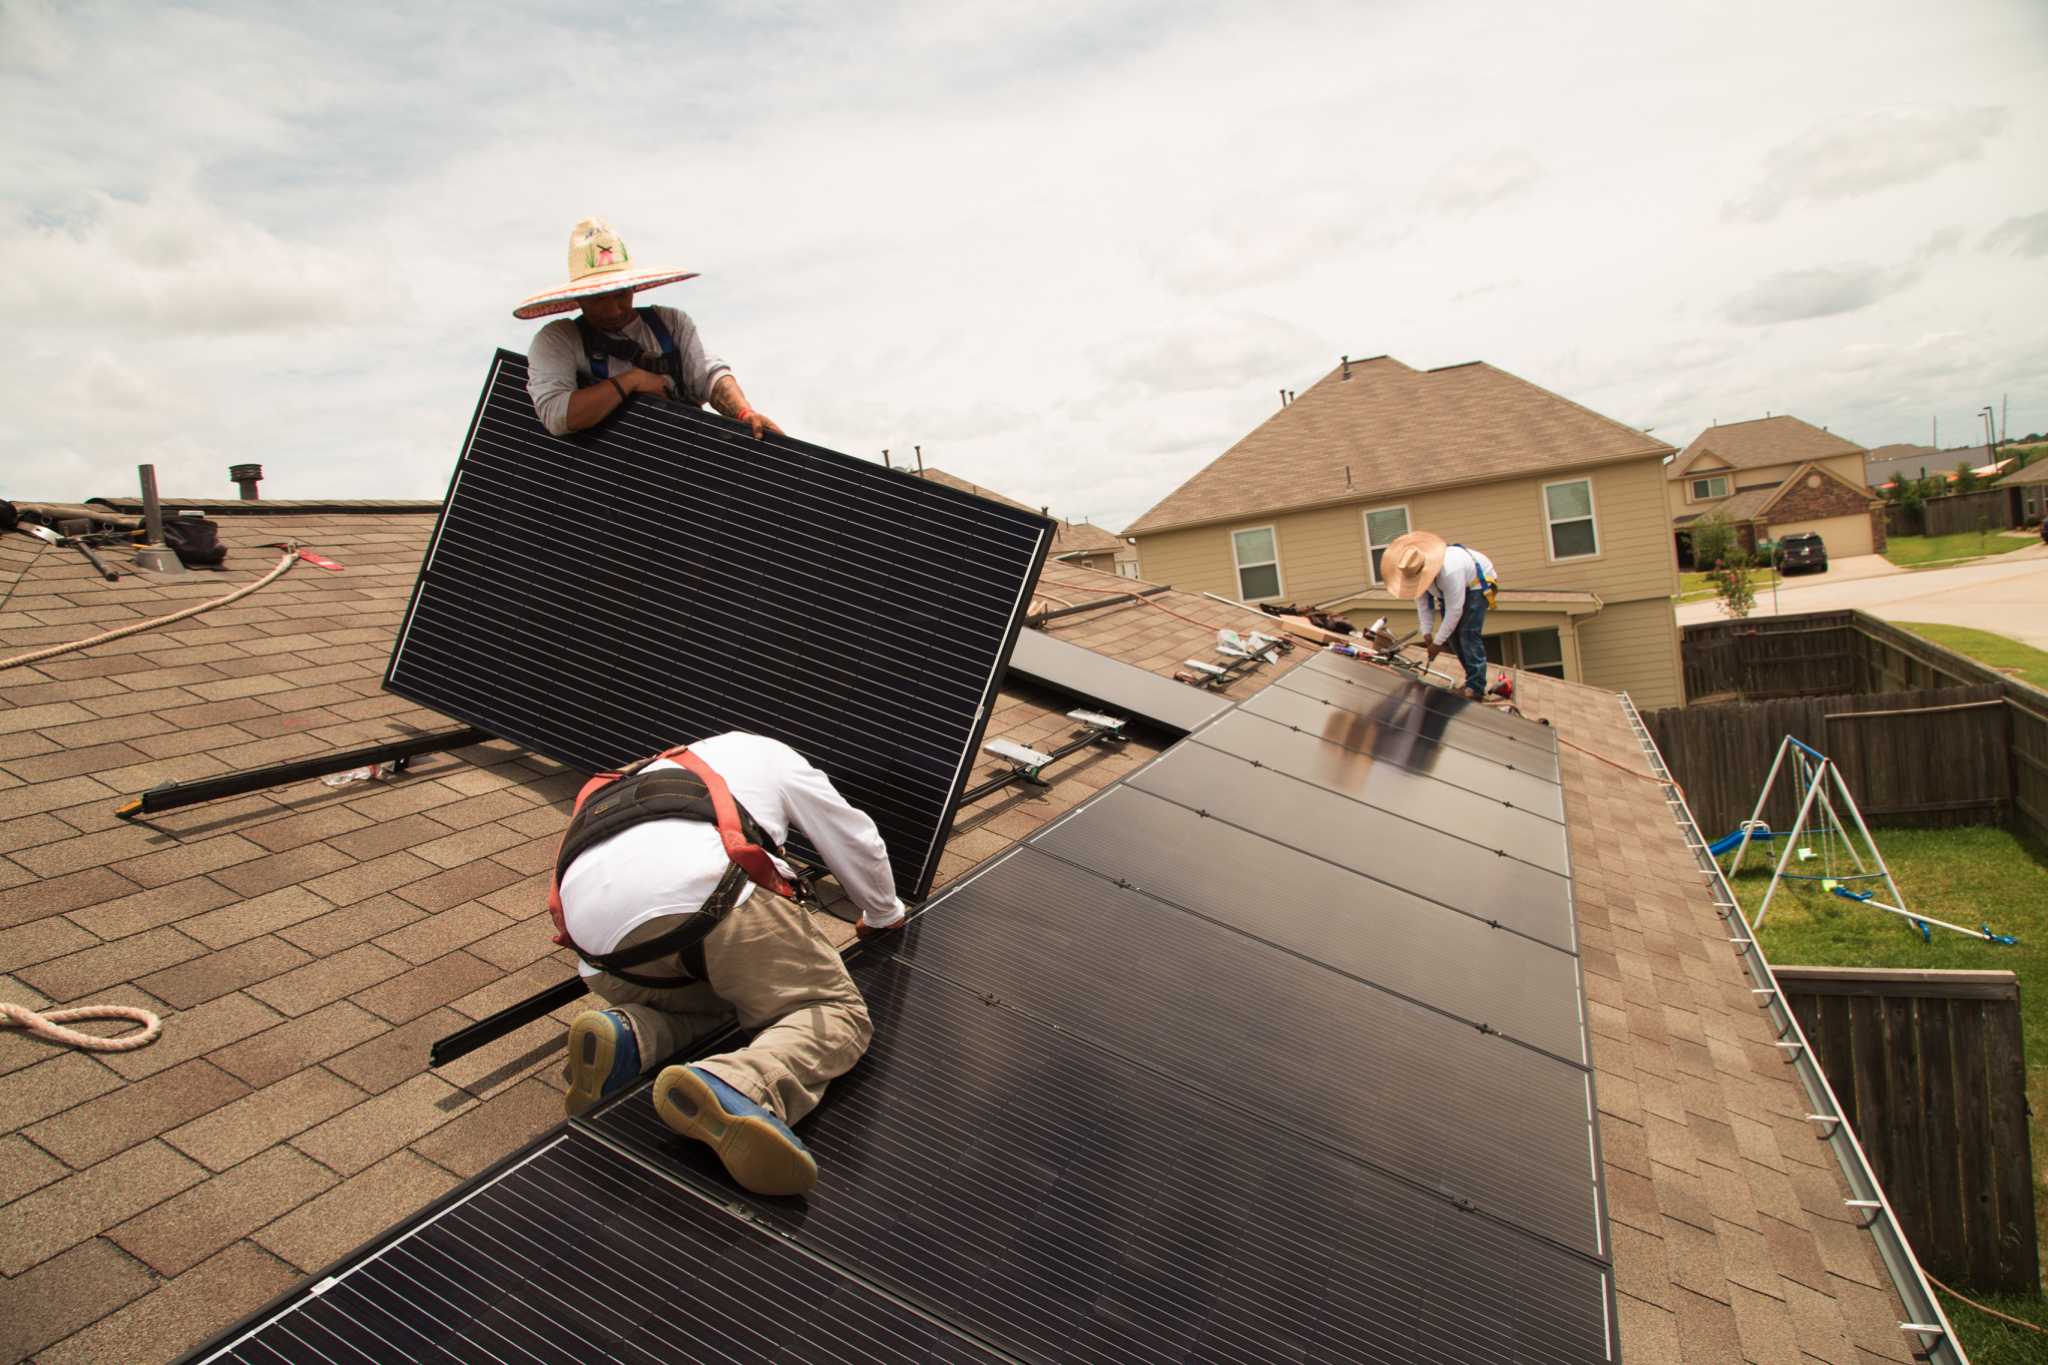 Biggest solar investments in Texas in places with regulated utilities - Houston Chronicle